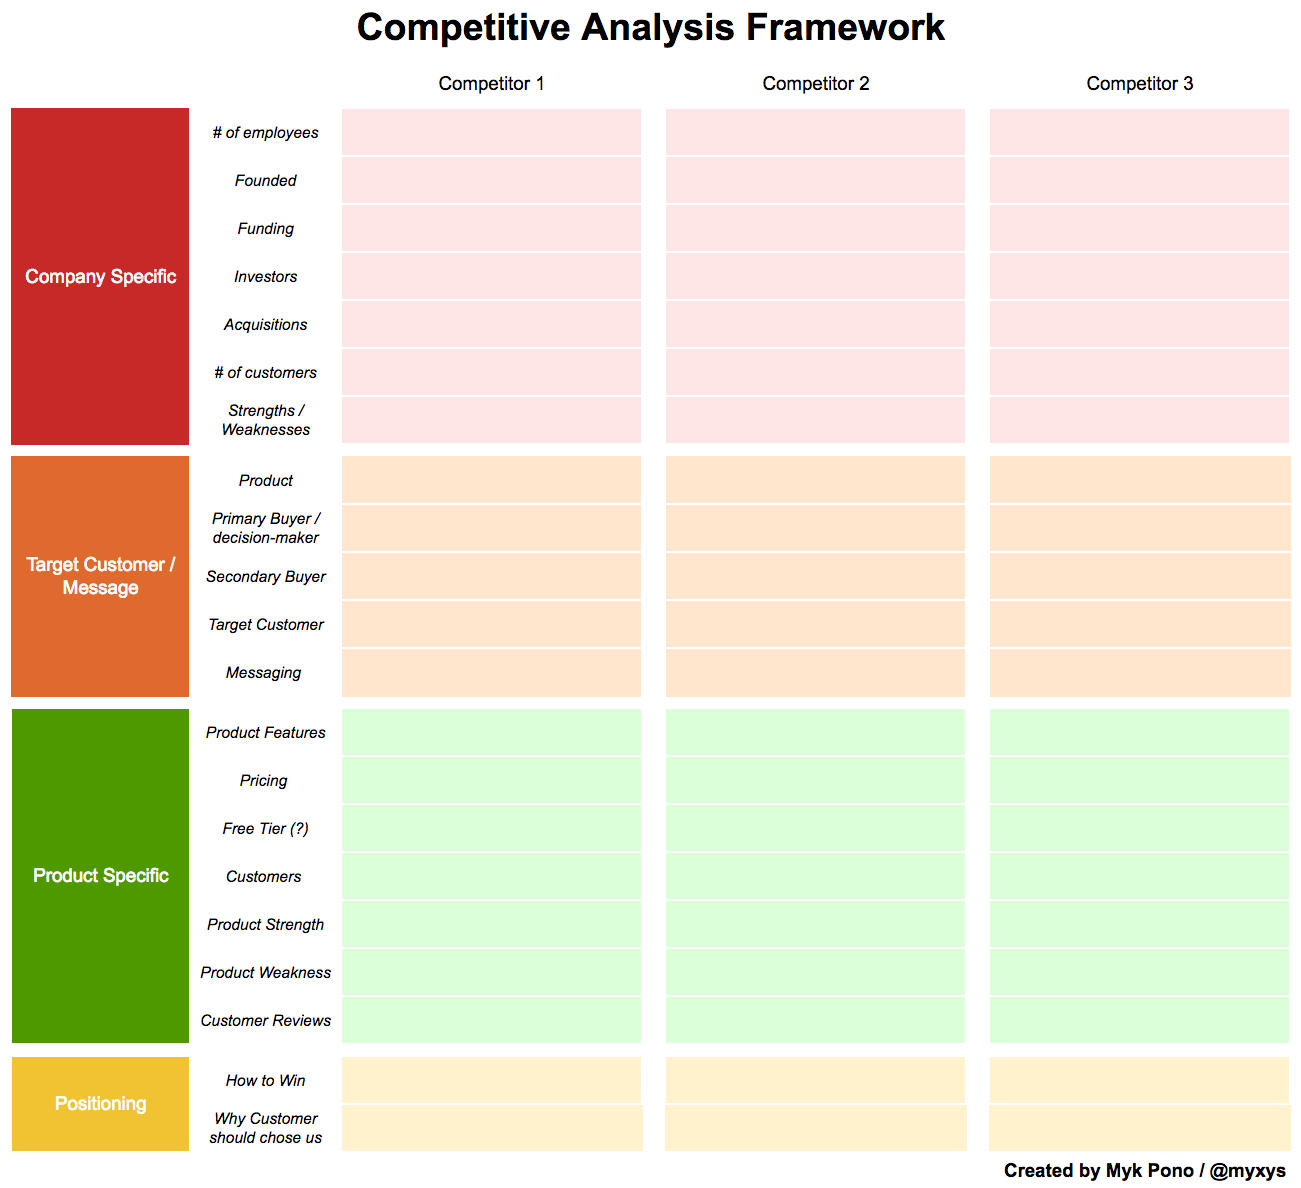 Competitive Analysis: How To Conduct A Comprehensive Competitive Analysis